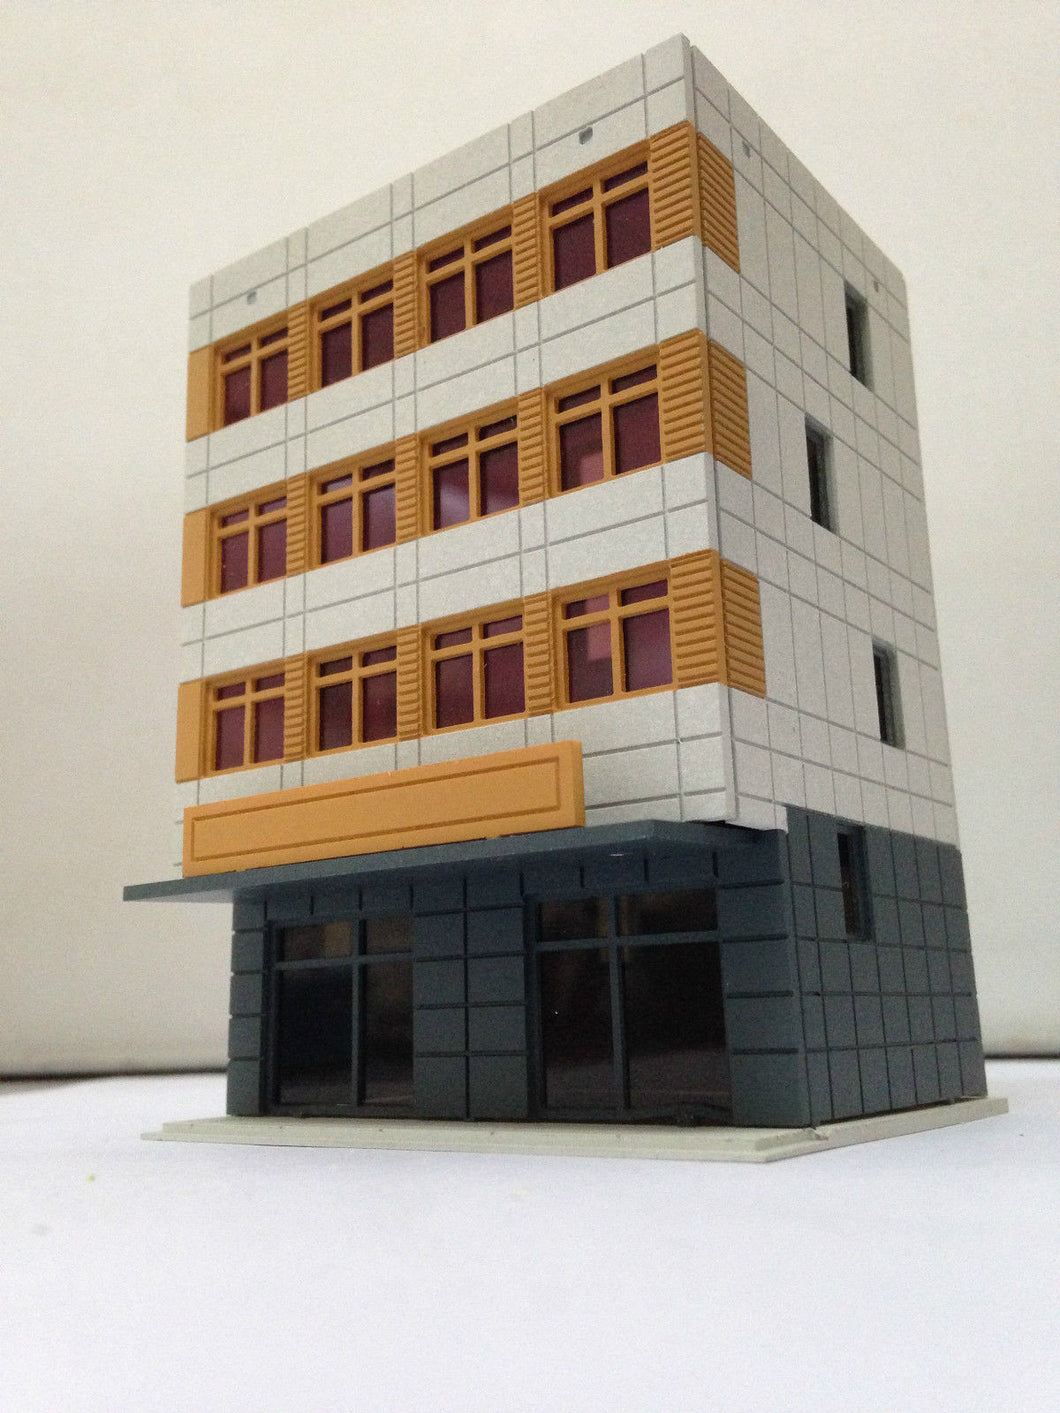 Colored Modern City Building 4-Story Office Grey N Scale Outland Models Railway